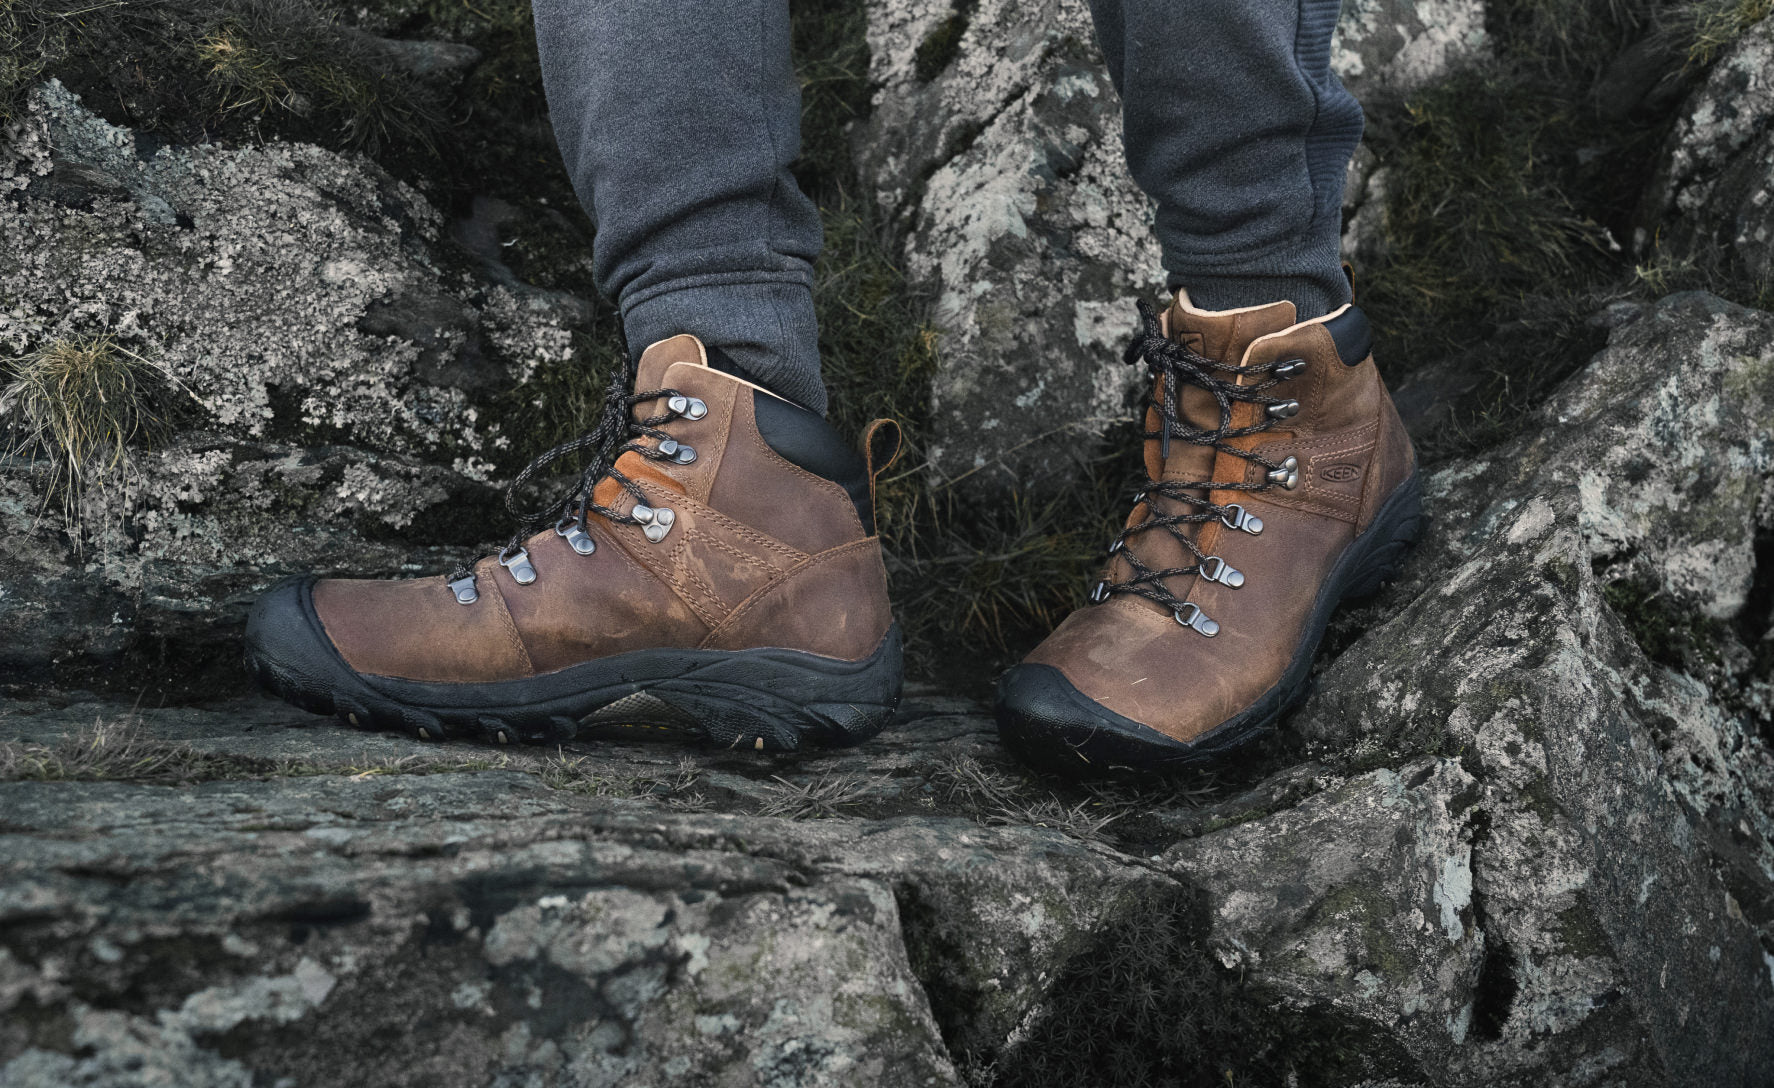 Leather Hiking Boots for Men - Pyrenees | KEEN Footwear